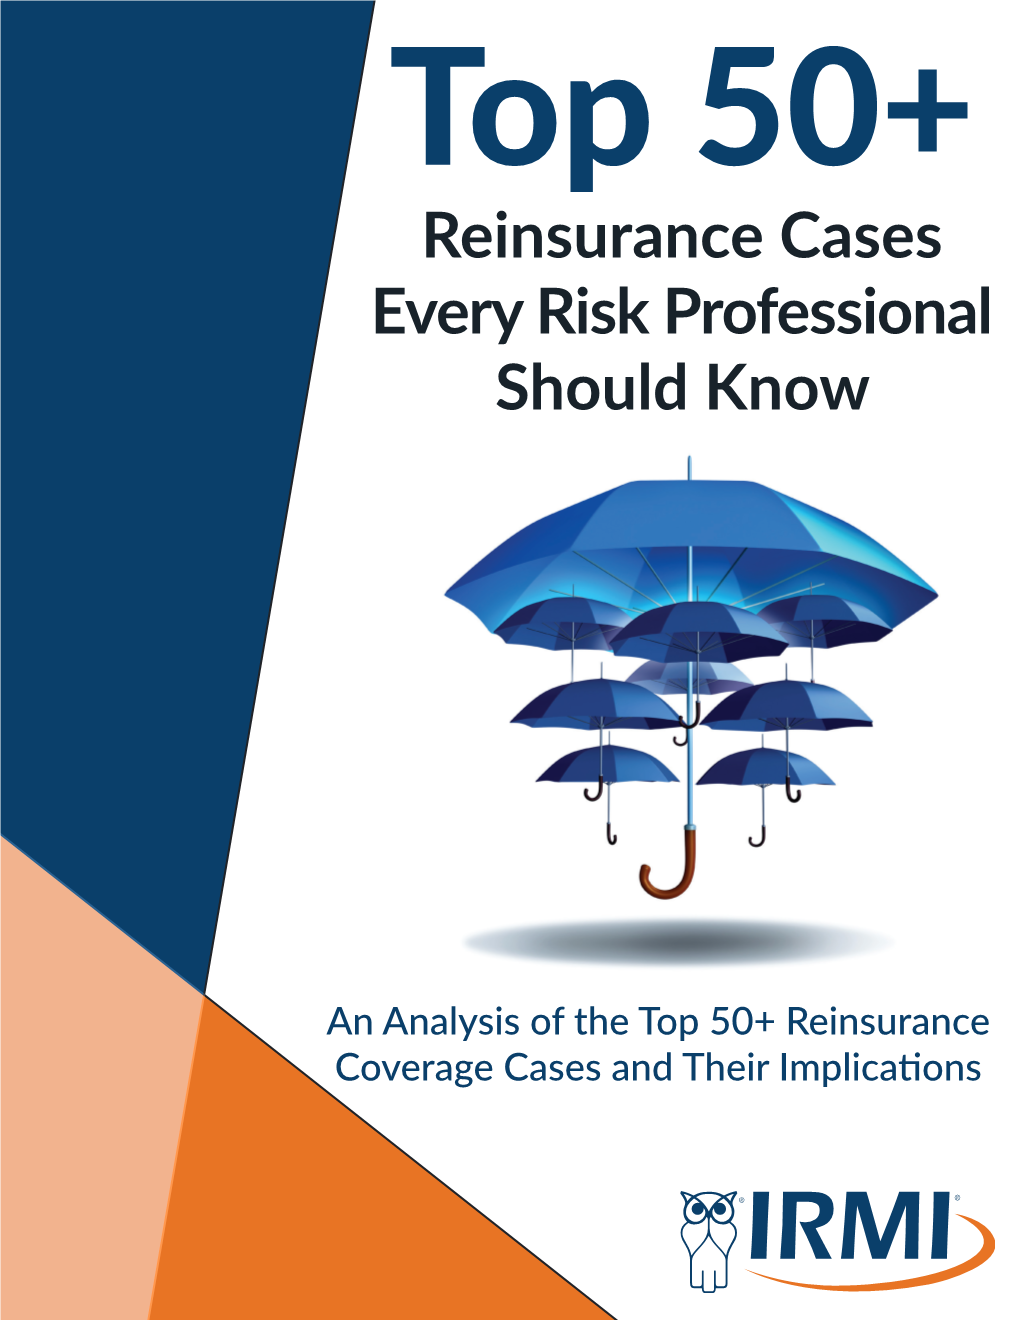 Top 50+ Reinsurance Cases Every Risk Professional Should Know